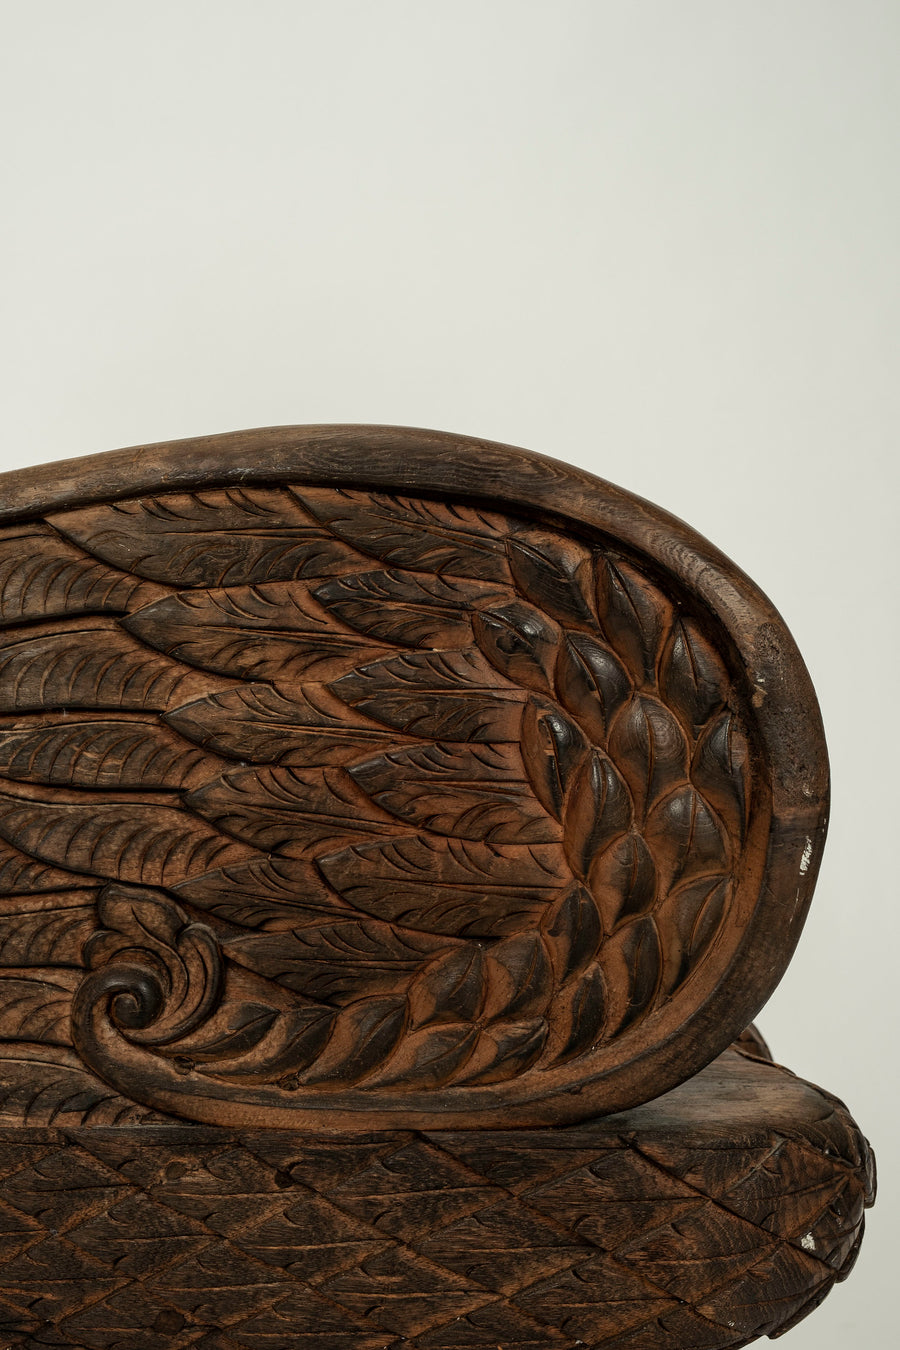 Anglo-Indian Peacock Chair